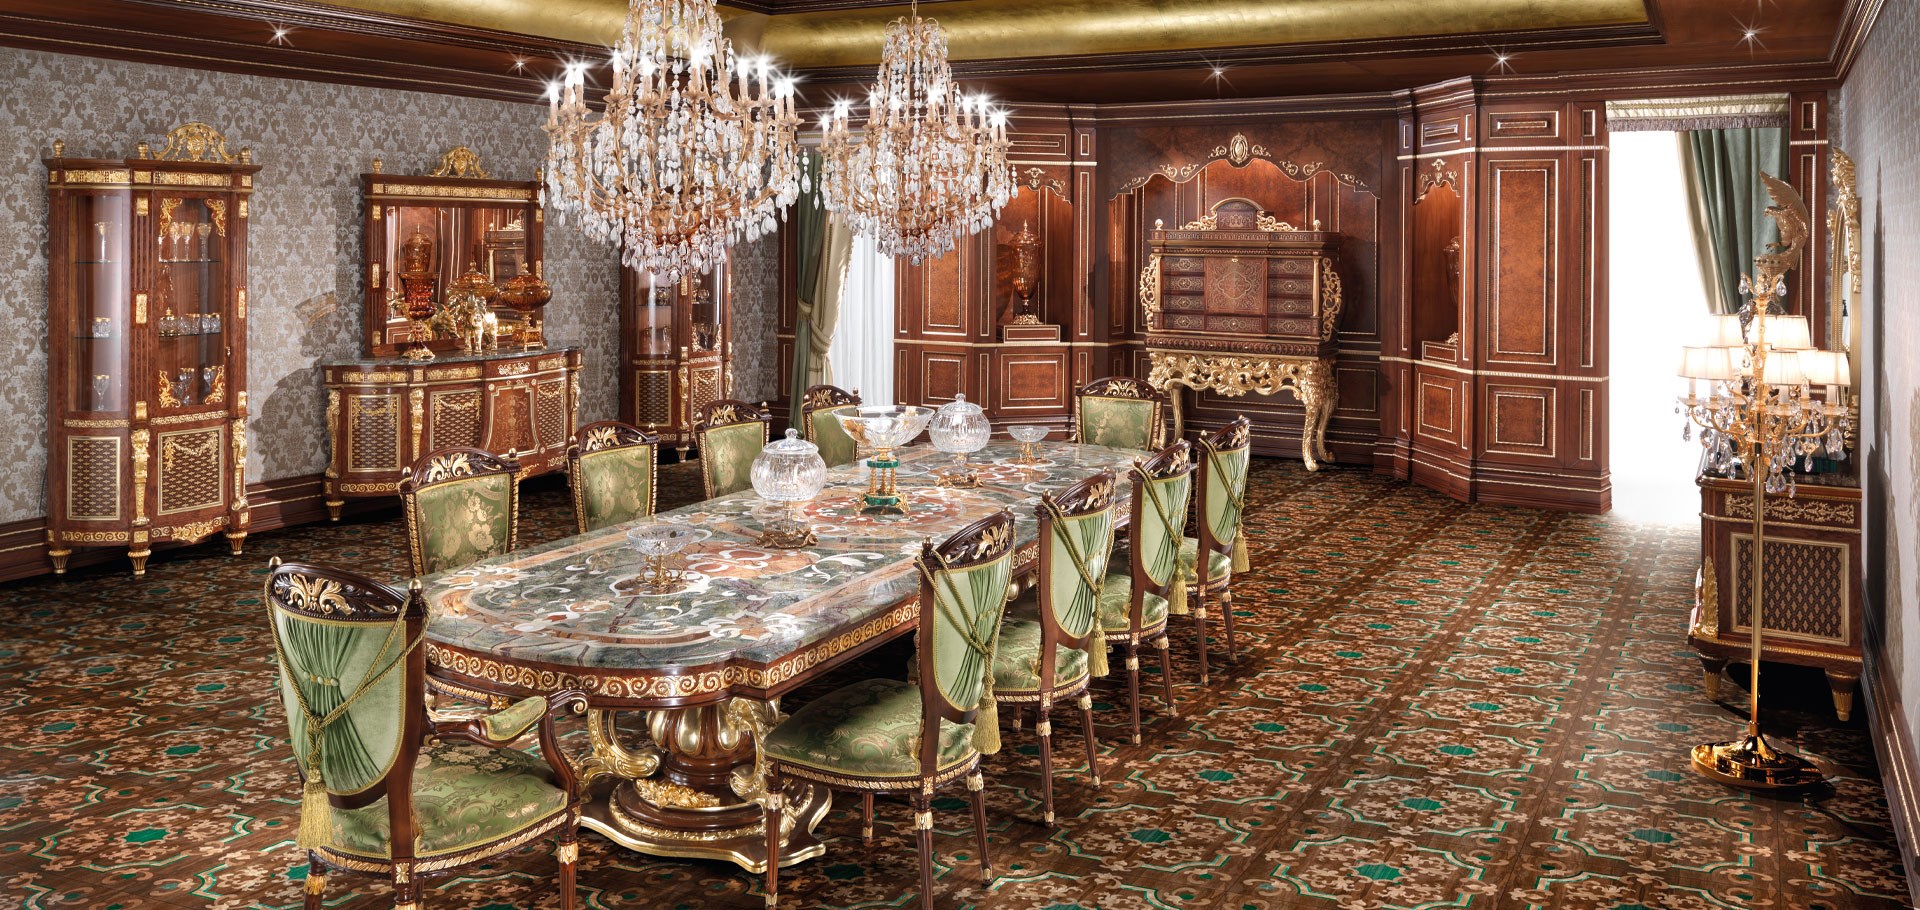 Louix XVII marble luxury precious stone table in a dining room for 10 people with wooden floor and
marquetry furniture